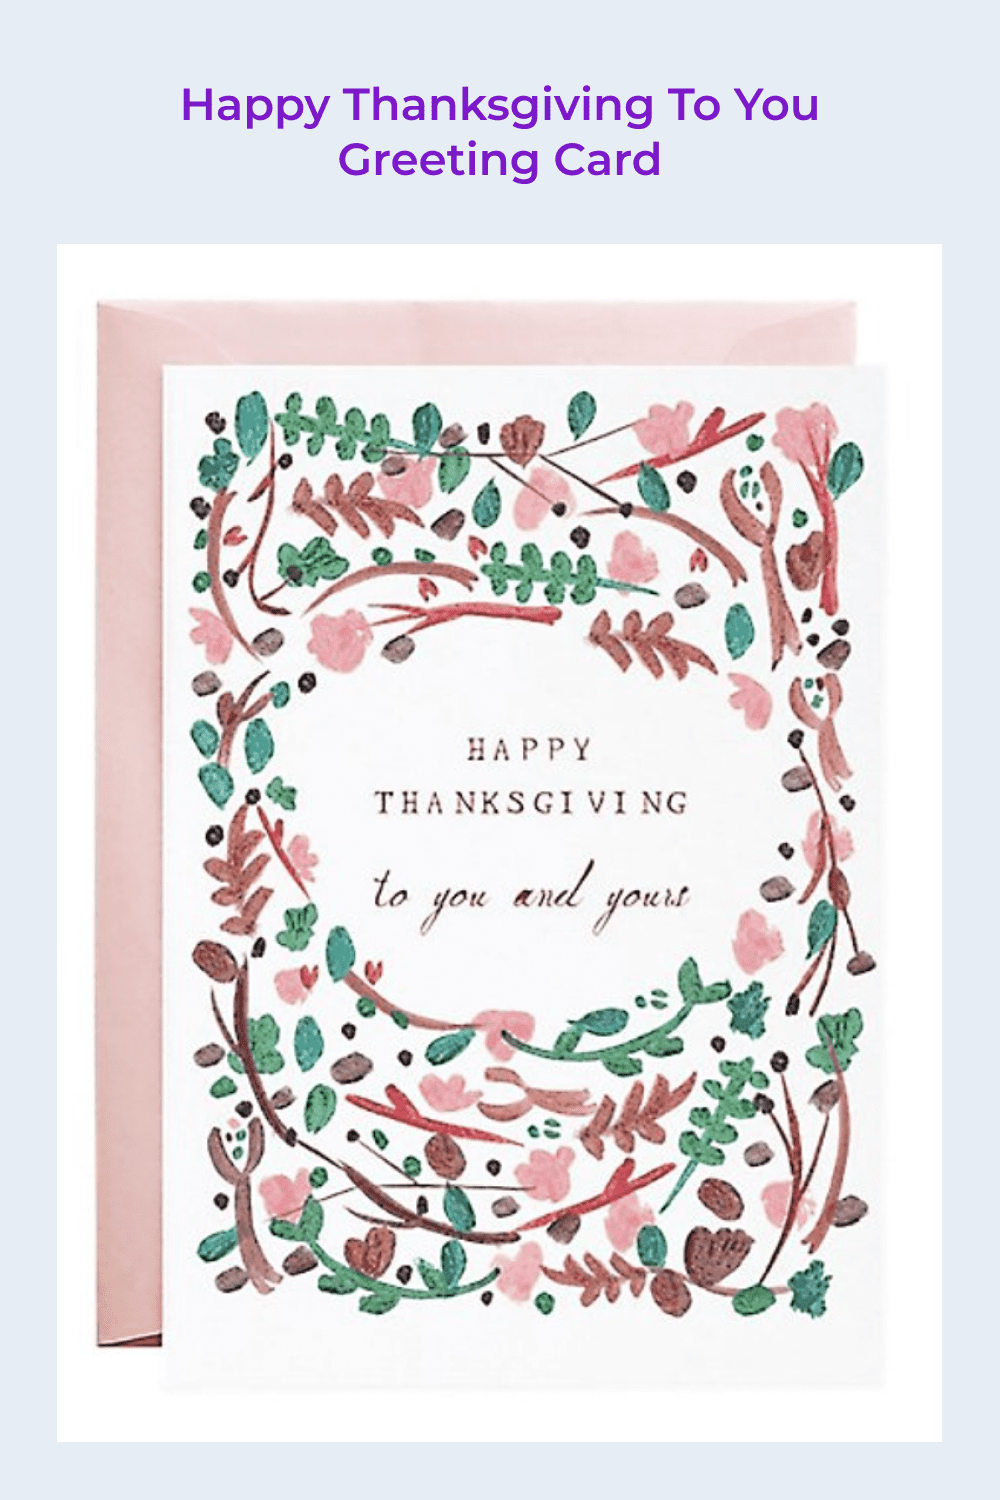 Happy thanksgiving To you greeting card.